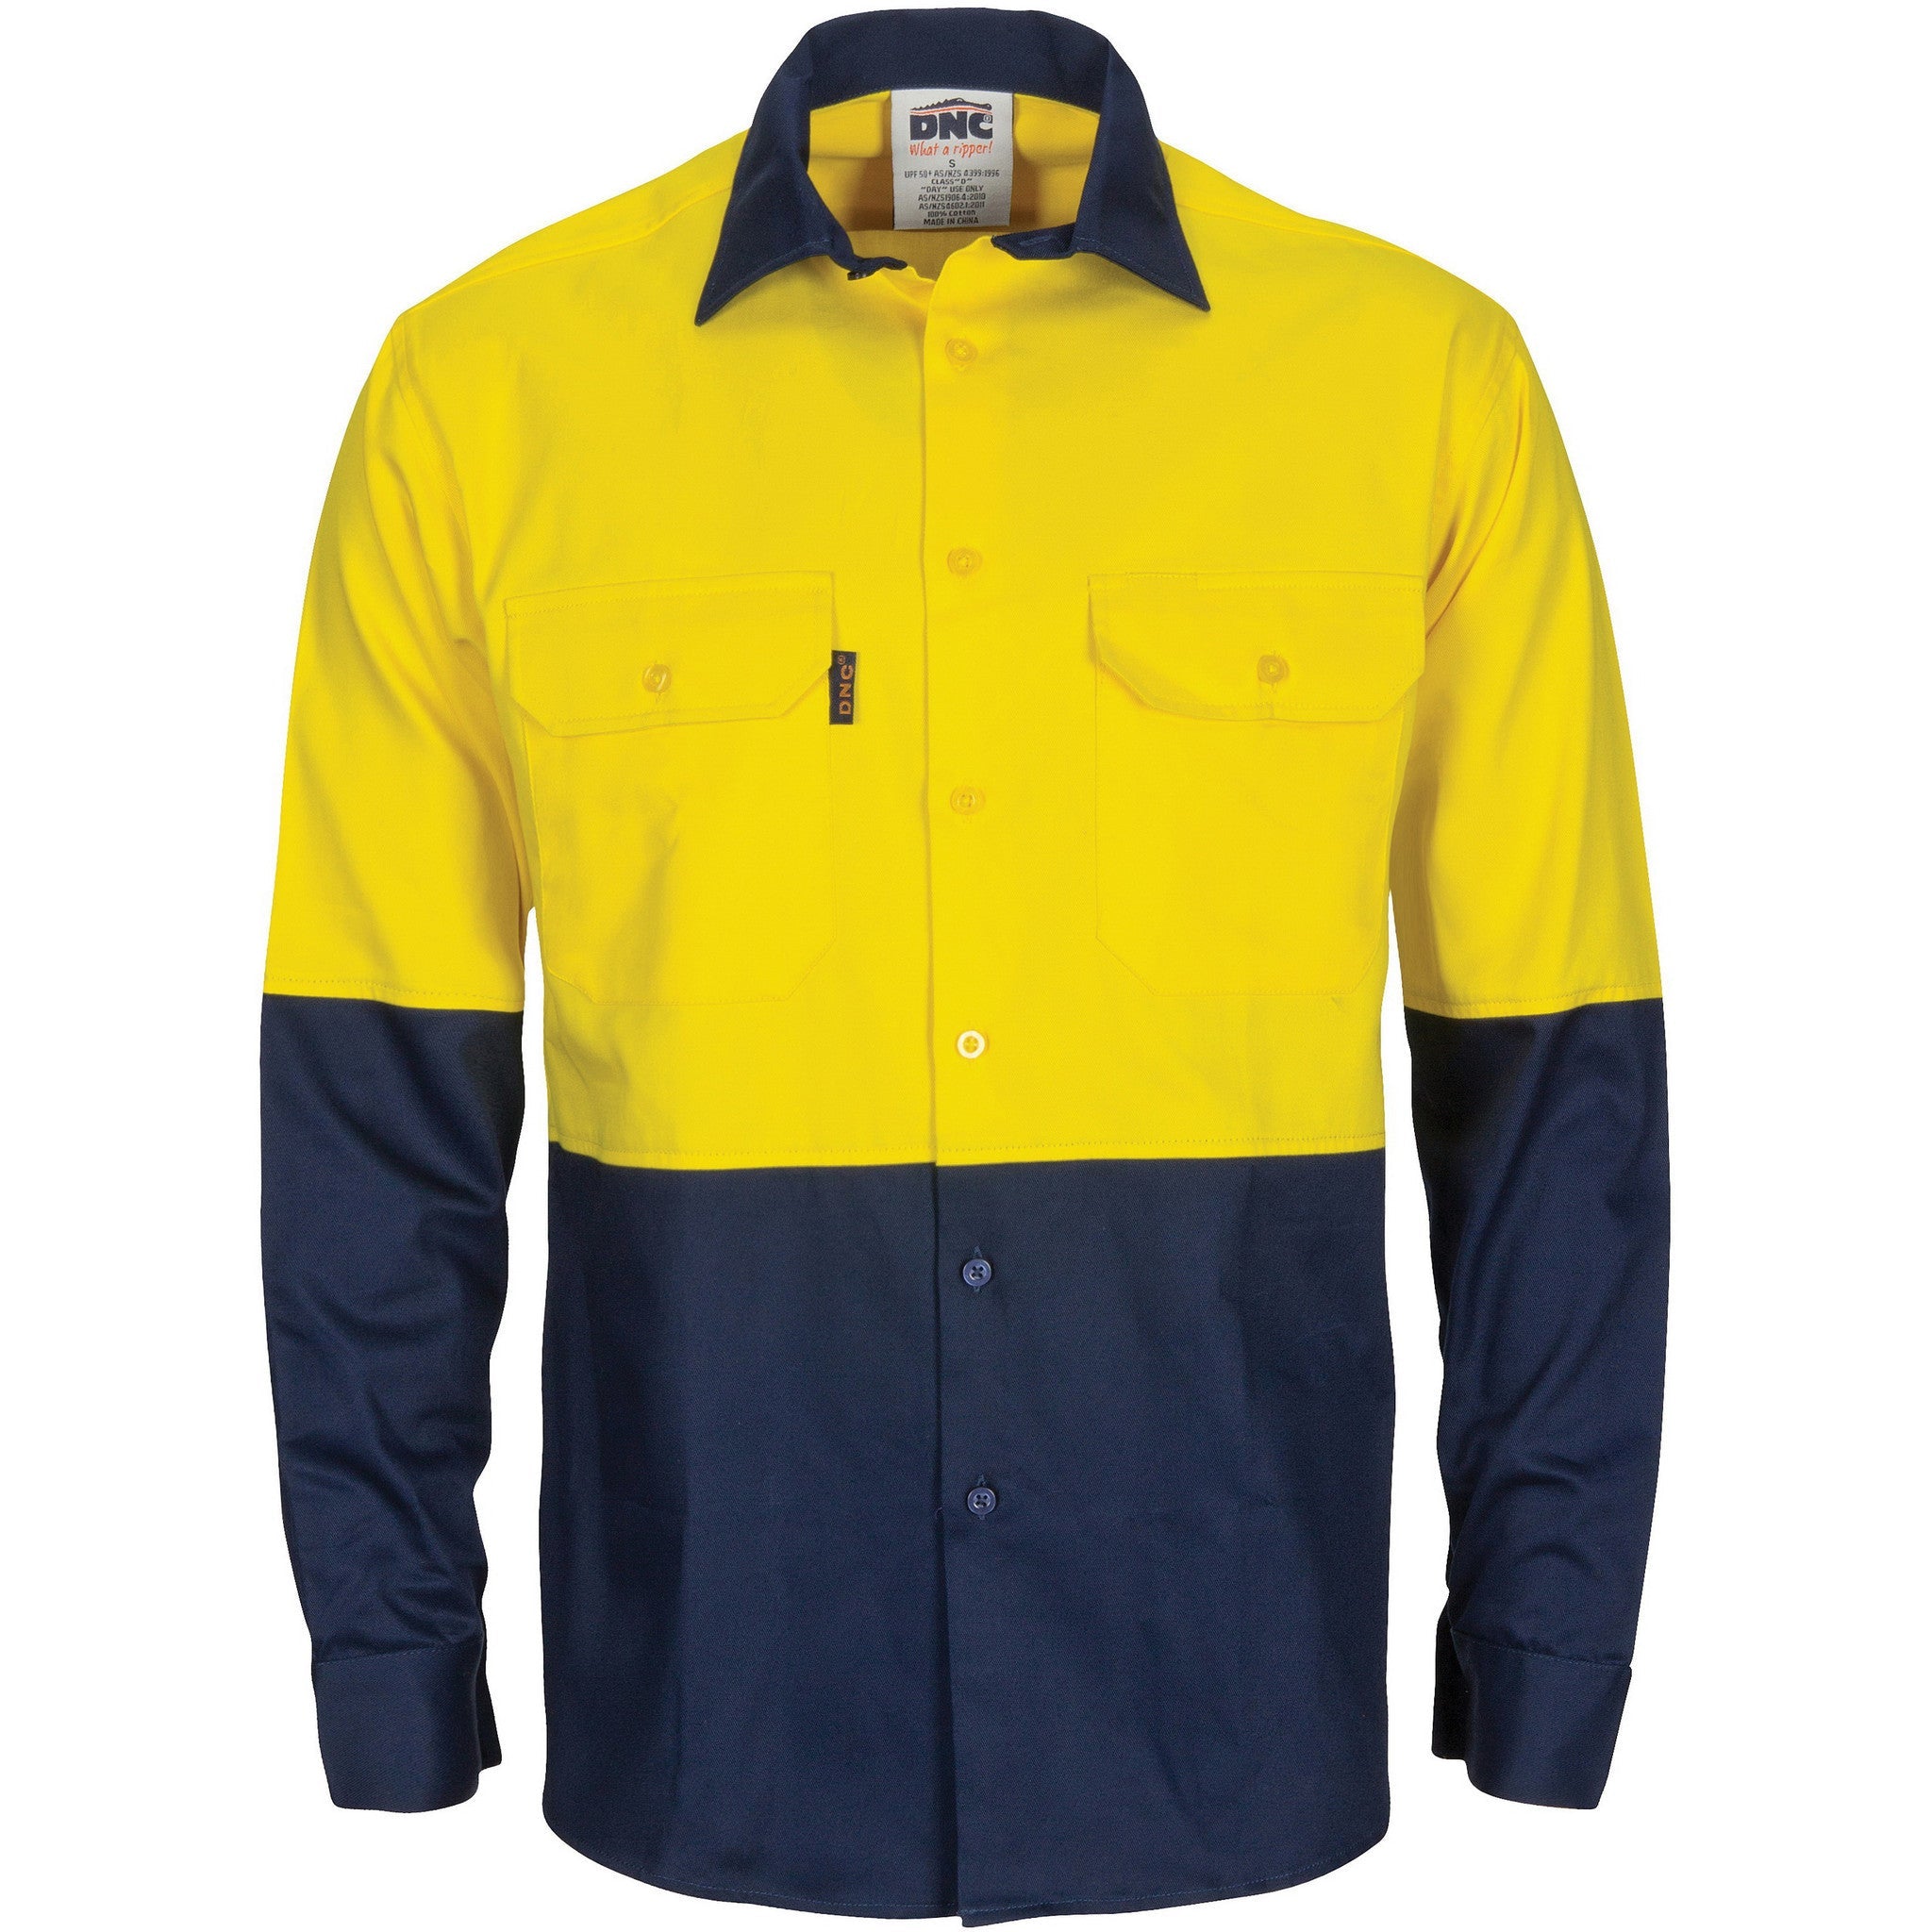 DNC Hi Vis L/W Cool Breeze T2 Vertical Vented Cotton Shirt With Gusset Sleeves L/S (3733)